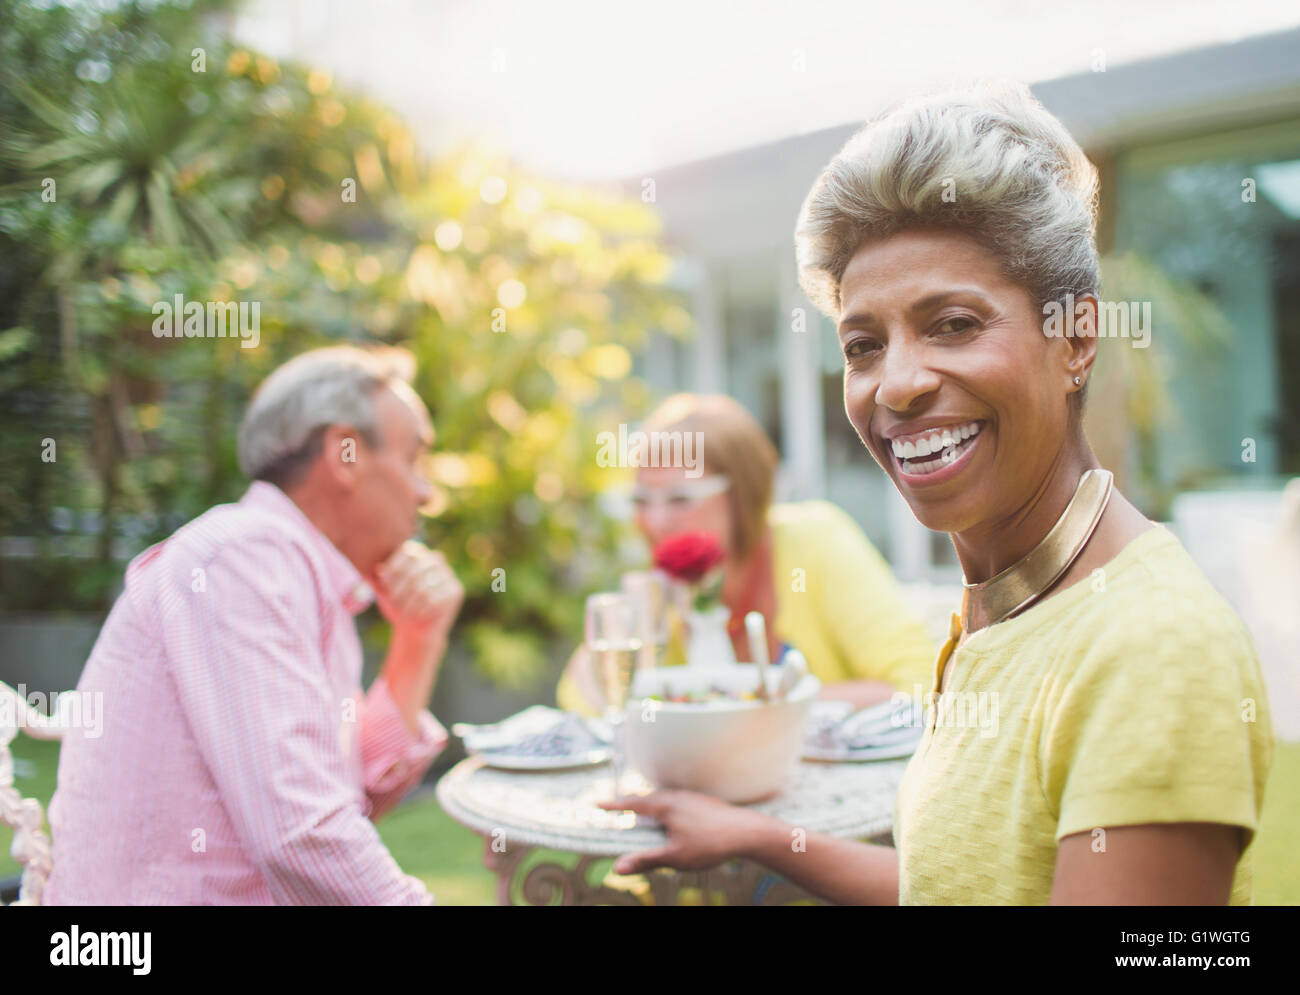 Portrait smiling mature woman enjoying lunch with friends in garden Stock Photo